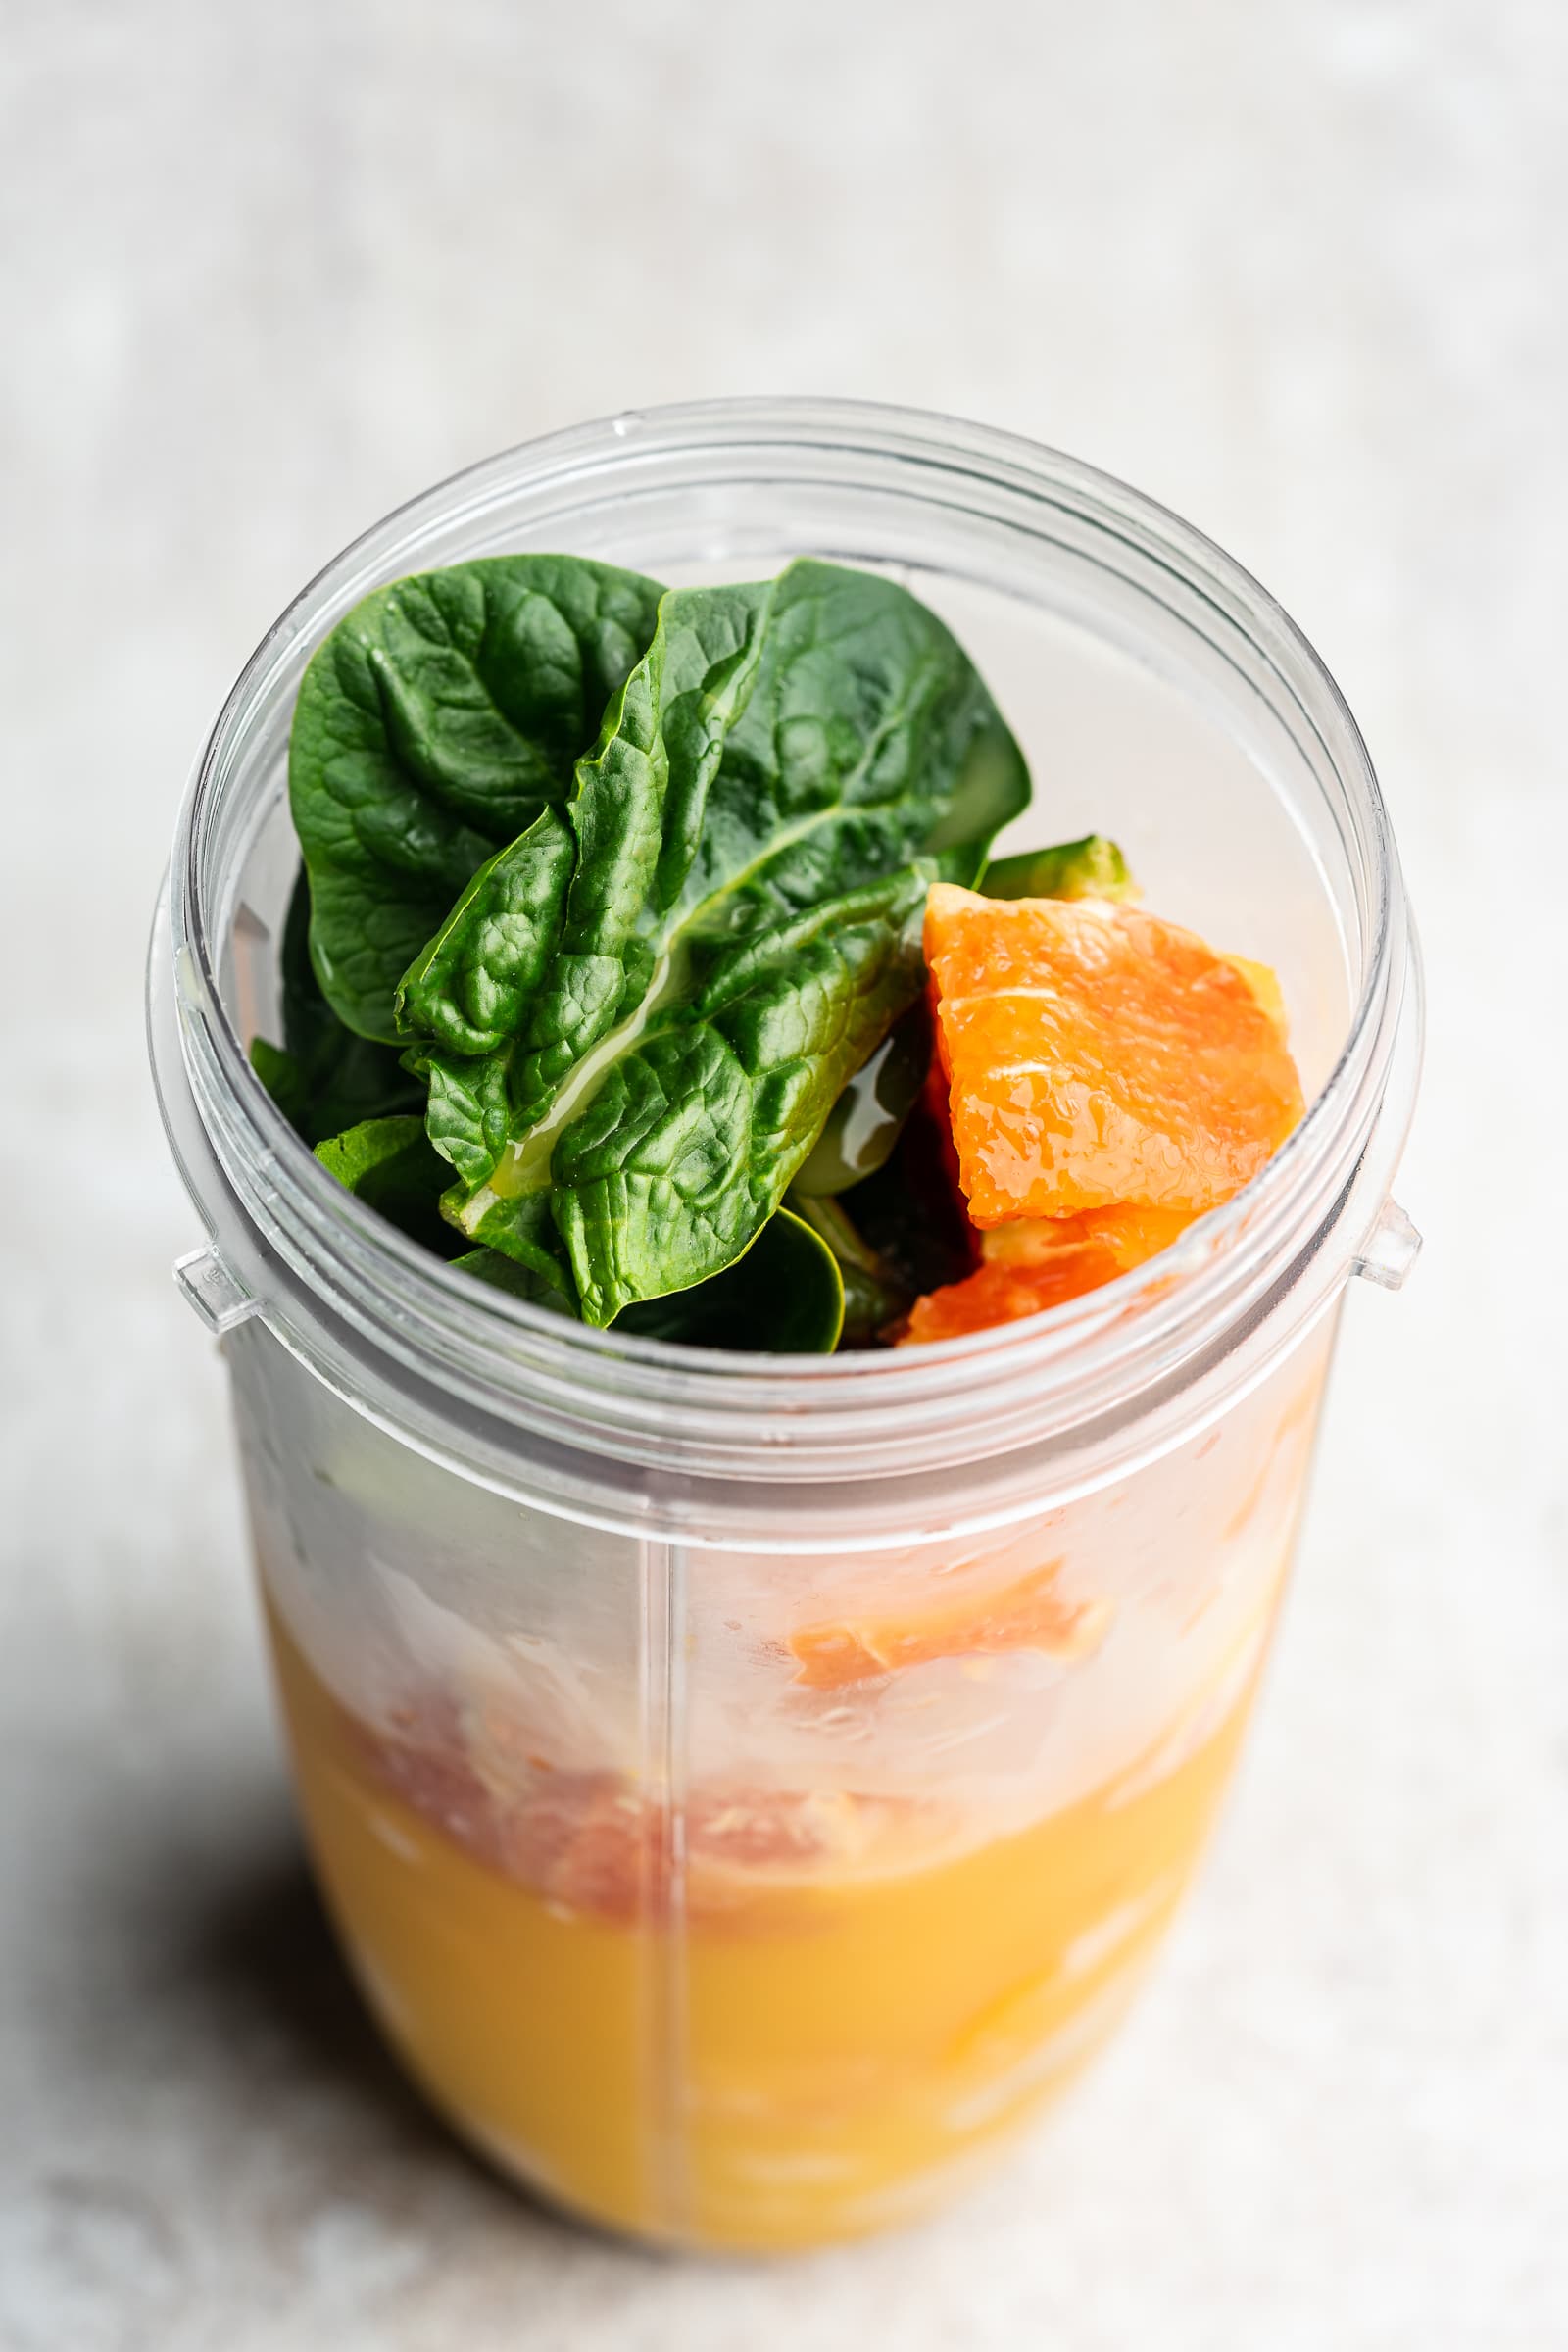 Orange spinach smoothie before being blended.